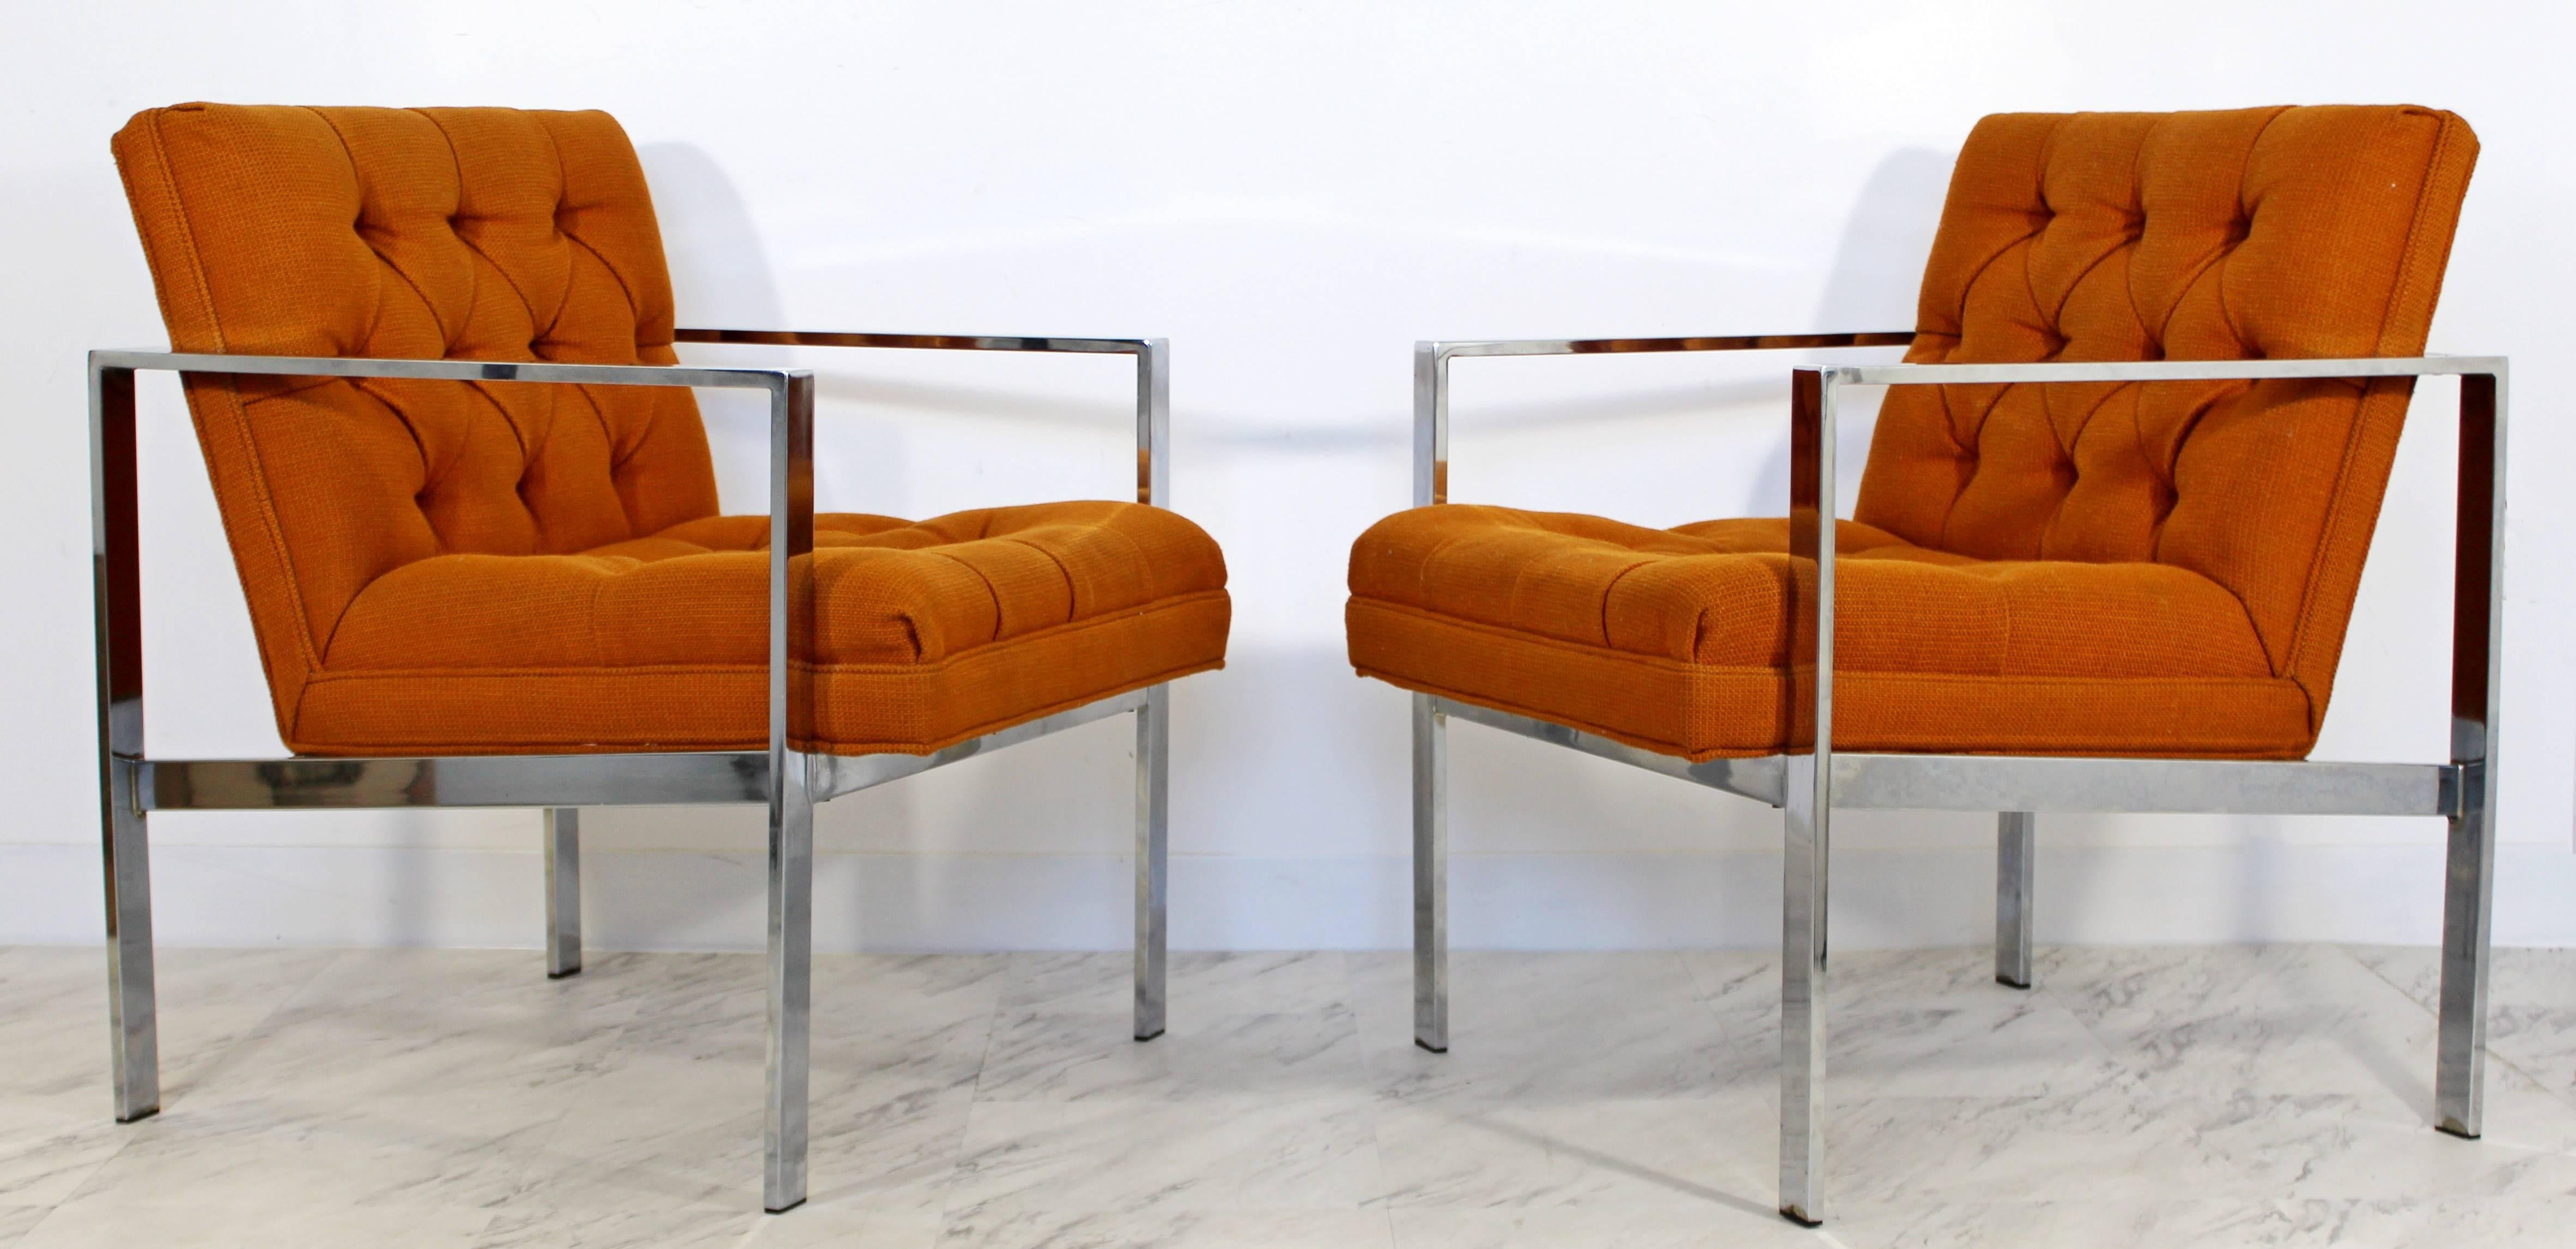 For your consideration is a gorgeous pair of flat bar chrome armchairs, with a tufted orange upholstery, by Milo Baughman, circa the 1970s. In excellent condition. The dimensions are 24